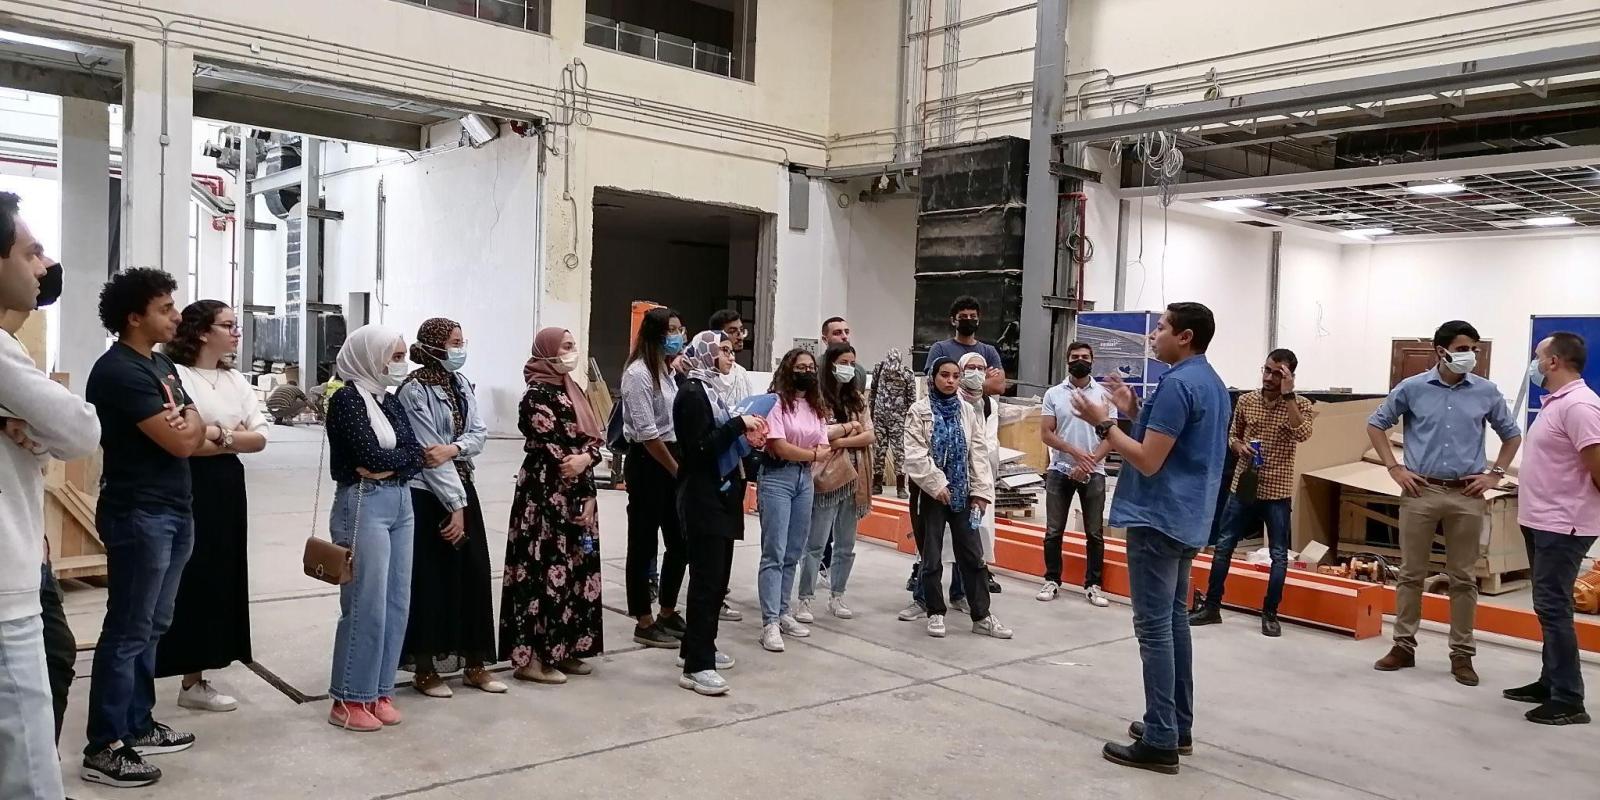 Group of students in a visit to the space agency in Egypt